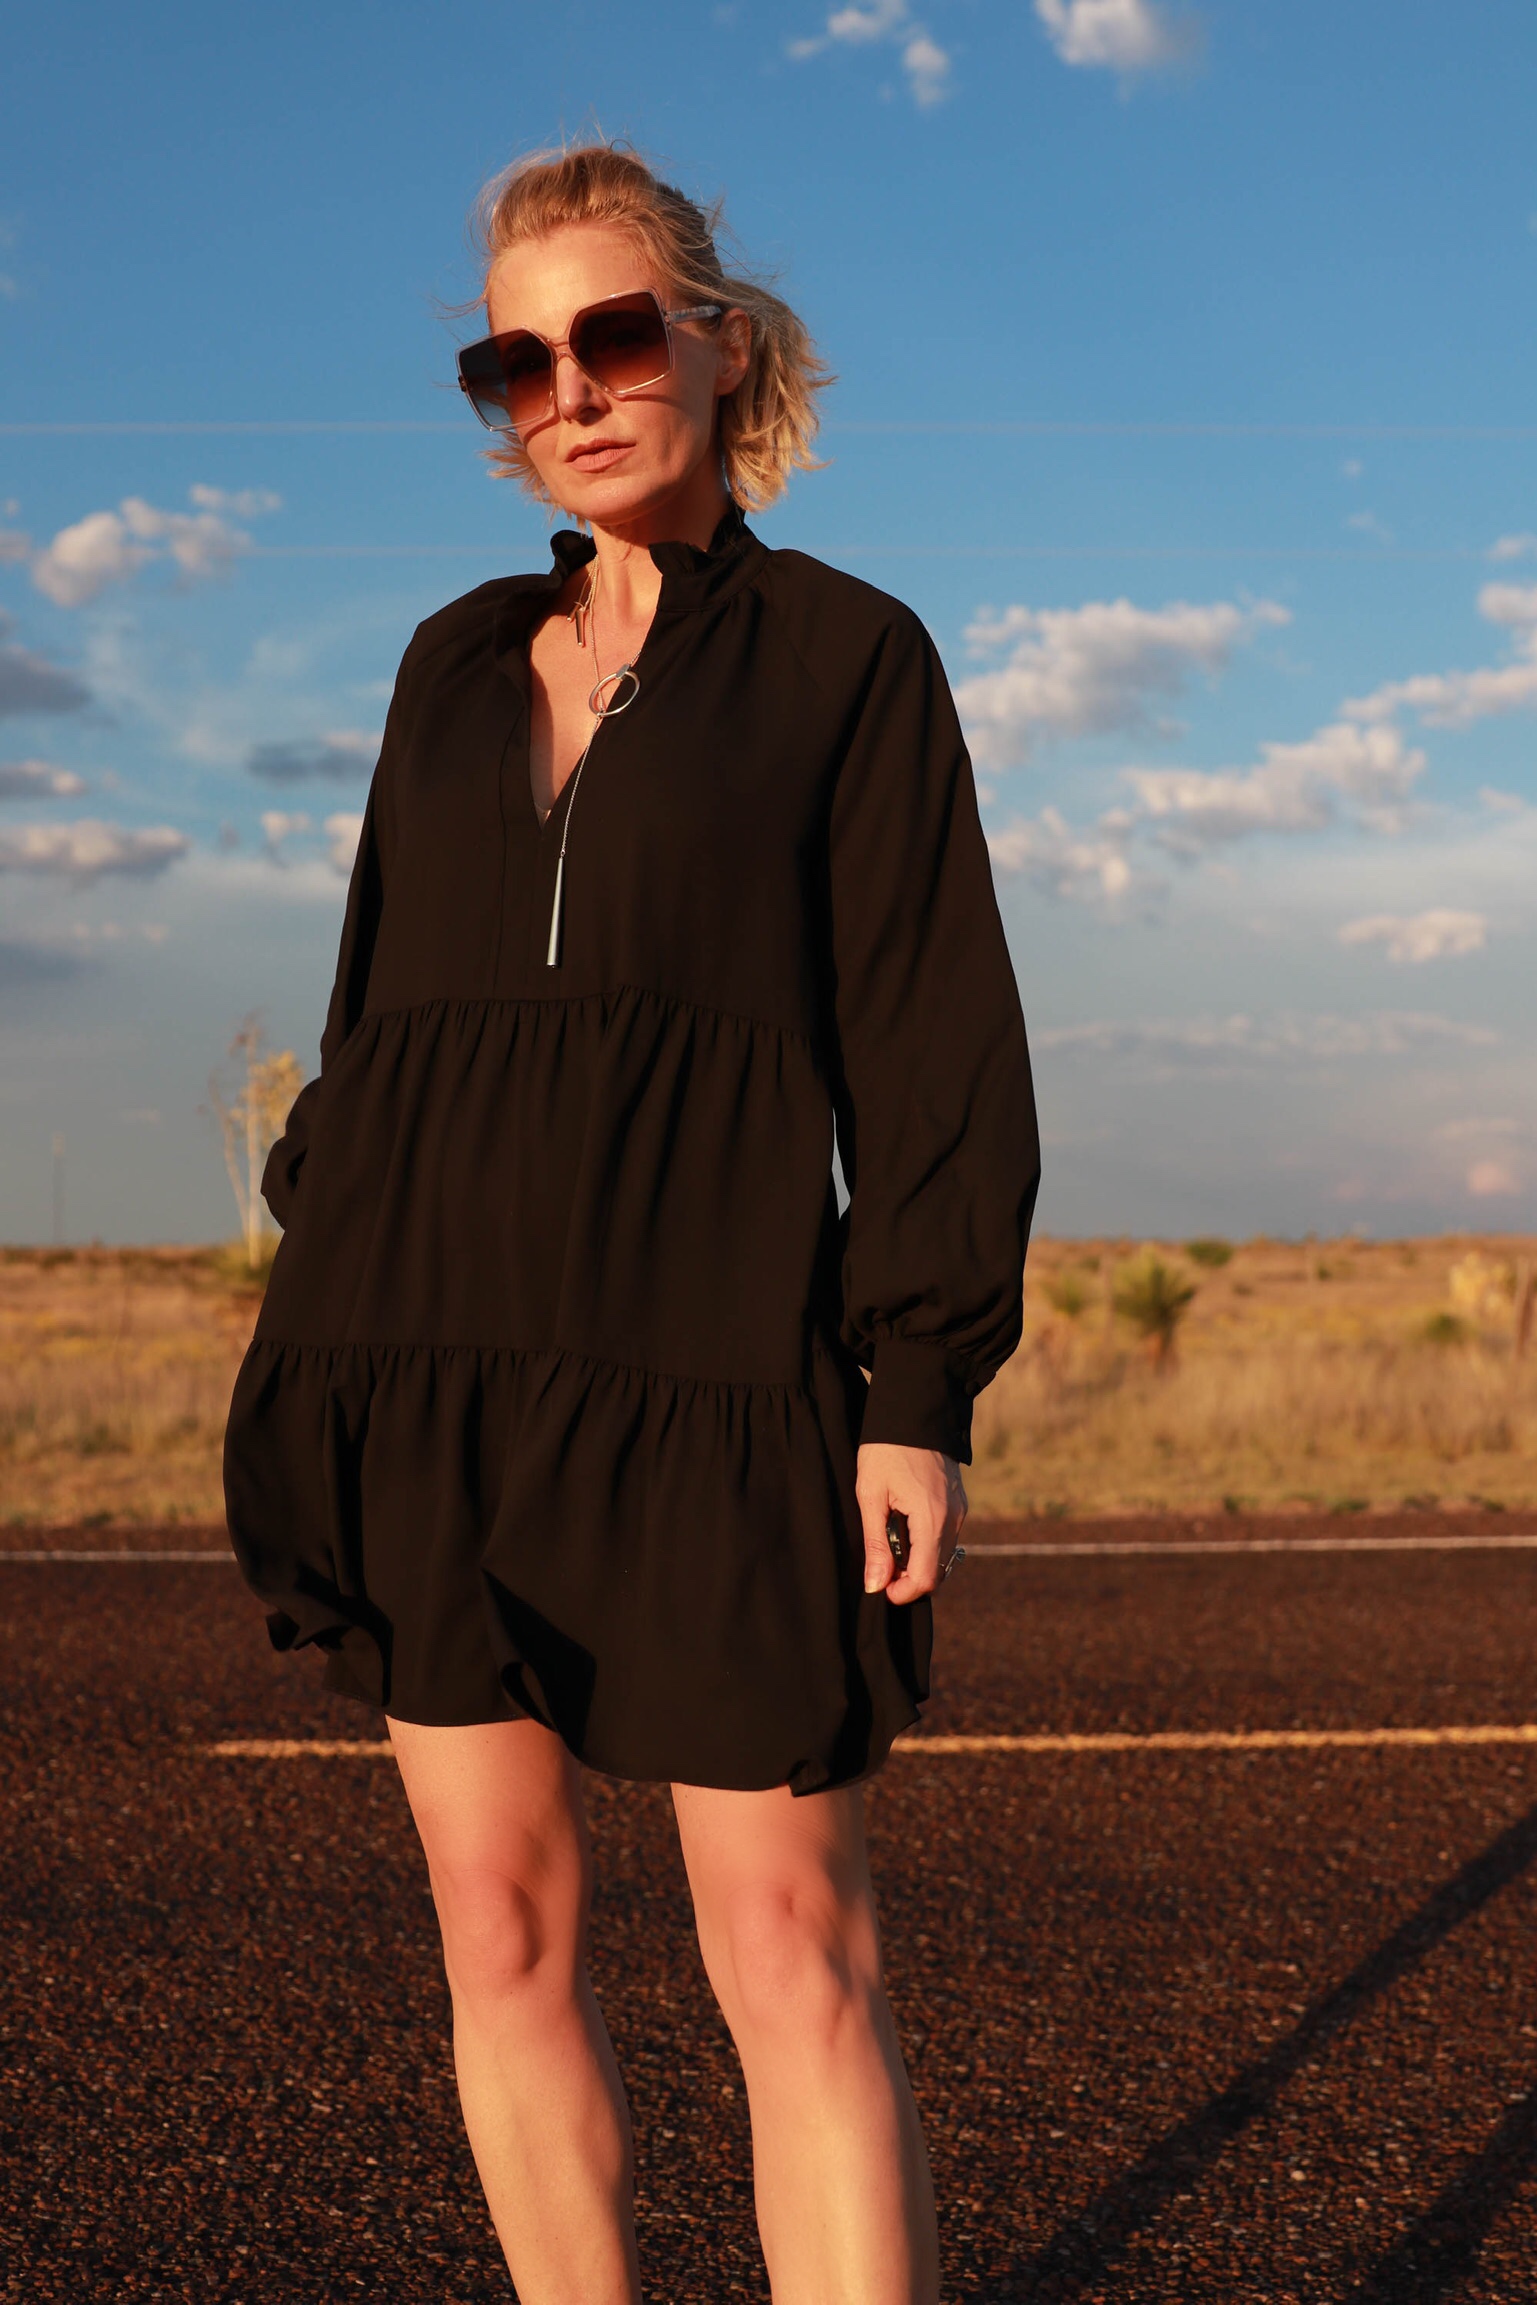 Dress For Summer, Fashion blogger Erin Busbee of Busbee Style wearing a black long sleeve tiered Amanda Uprichard dress with a Kendra Scott adjustable necklace, Saint Laurent sunglasses, and Valentino sandals in south Texas